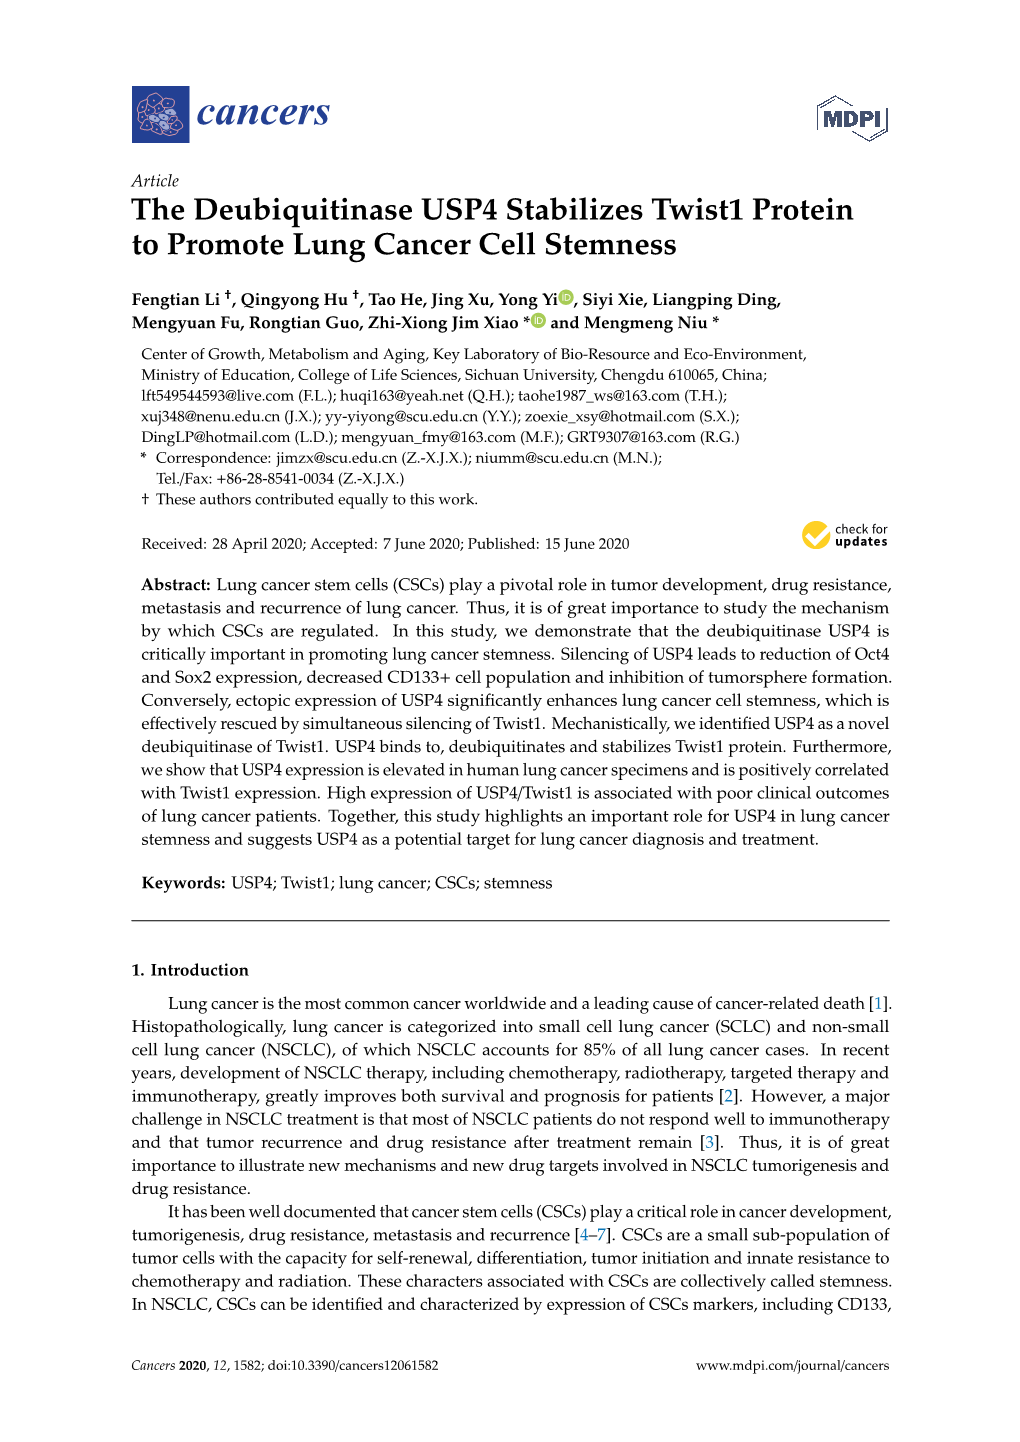 The Deubiquitinase USP4 Stabilizes Twist1 Protein to Promote Lung Cancer Cell Stemness